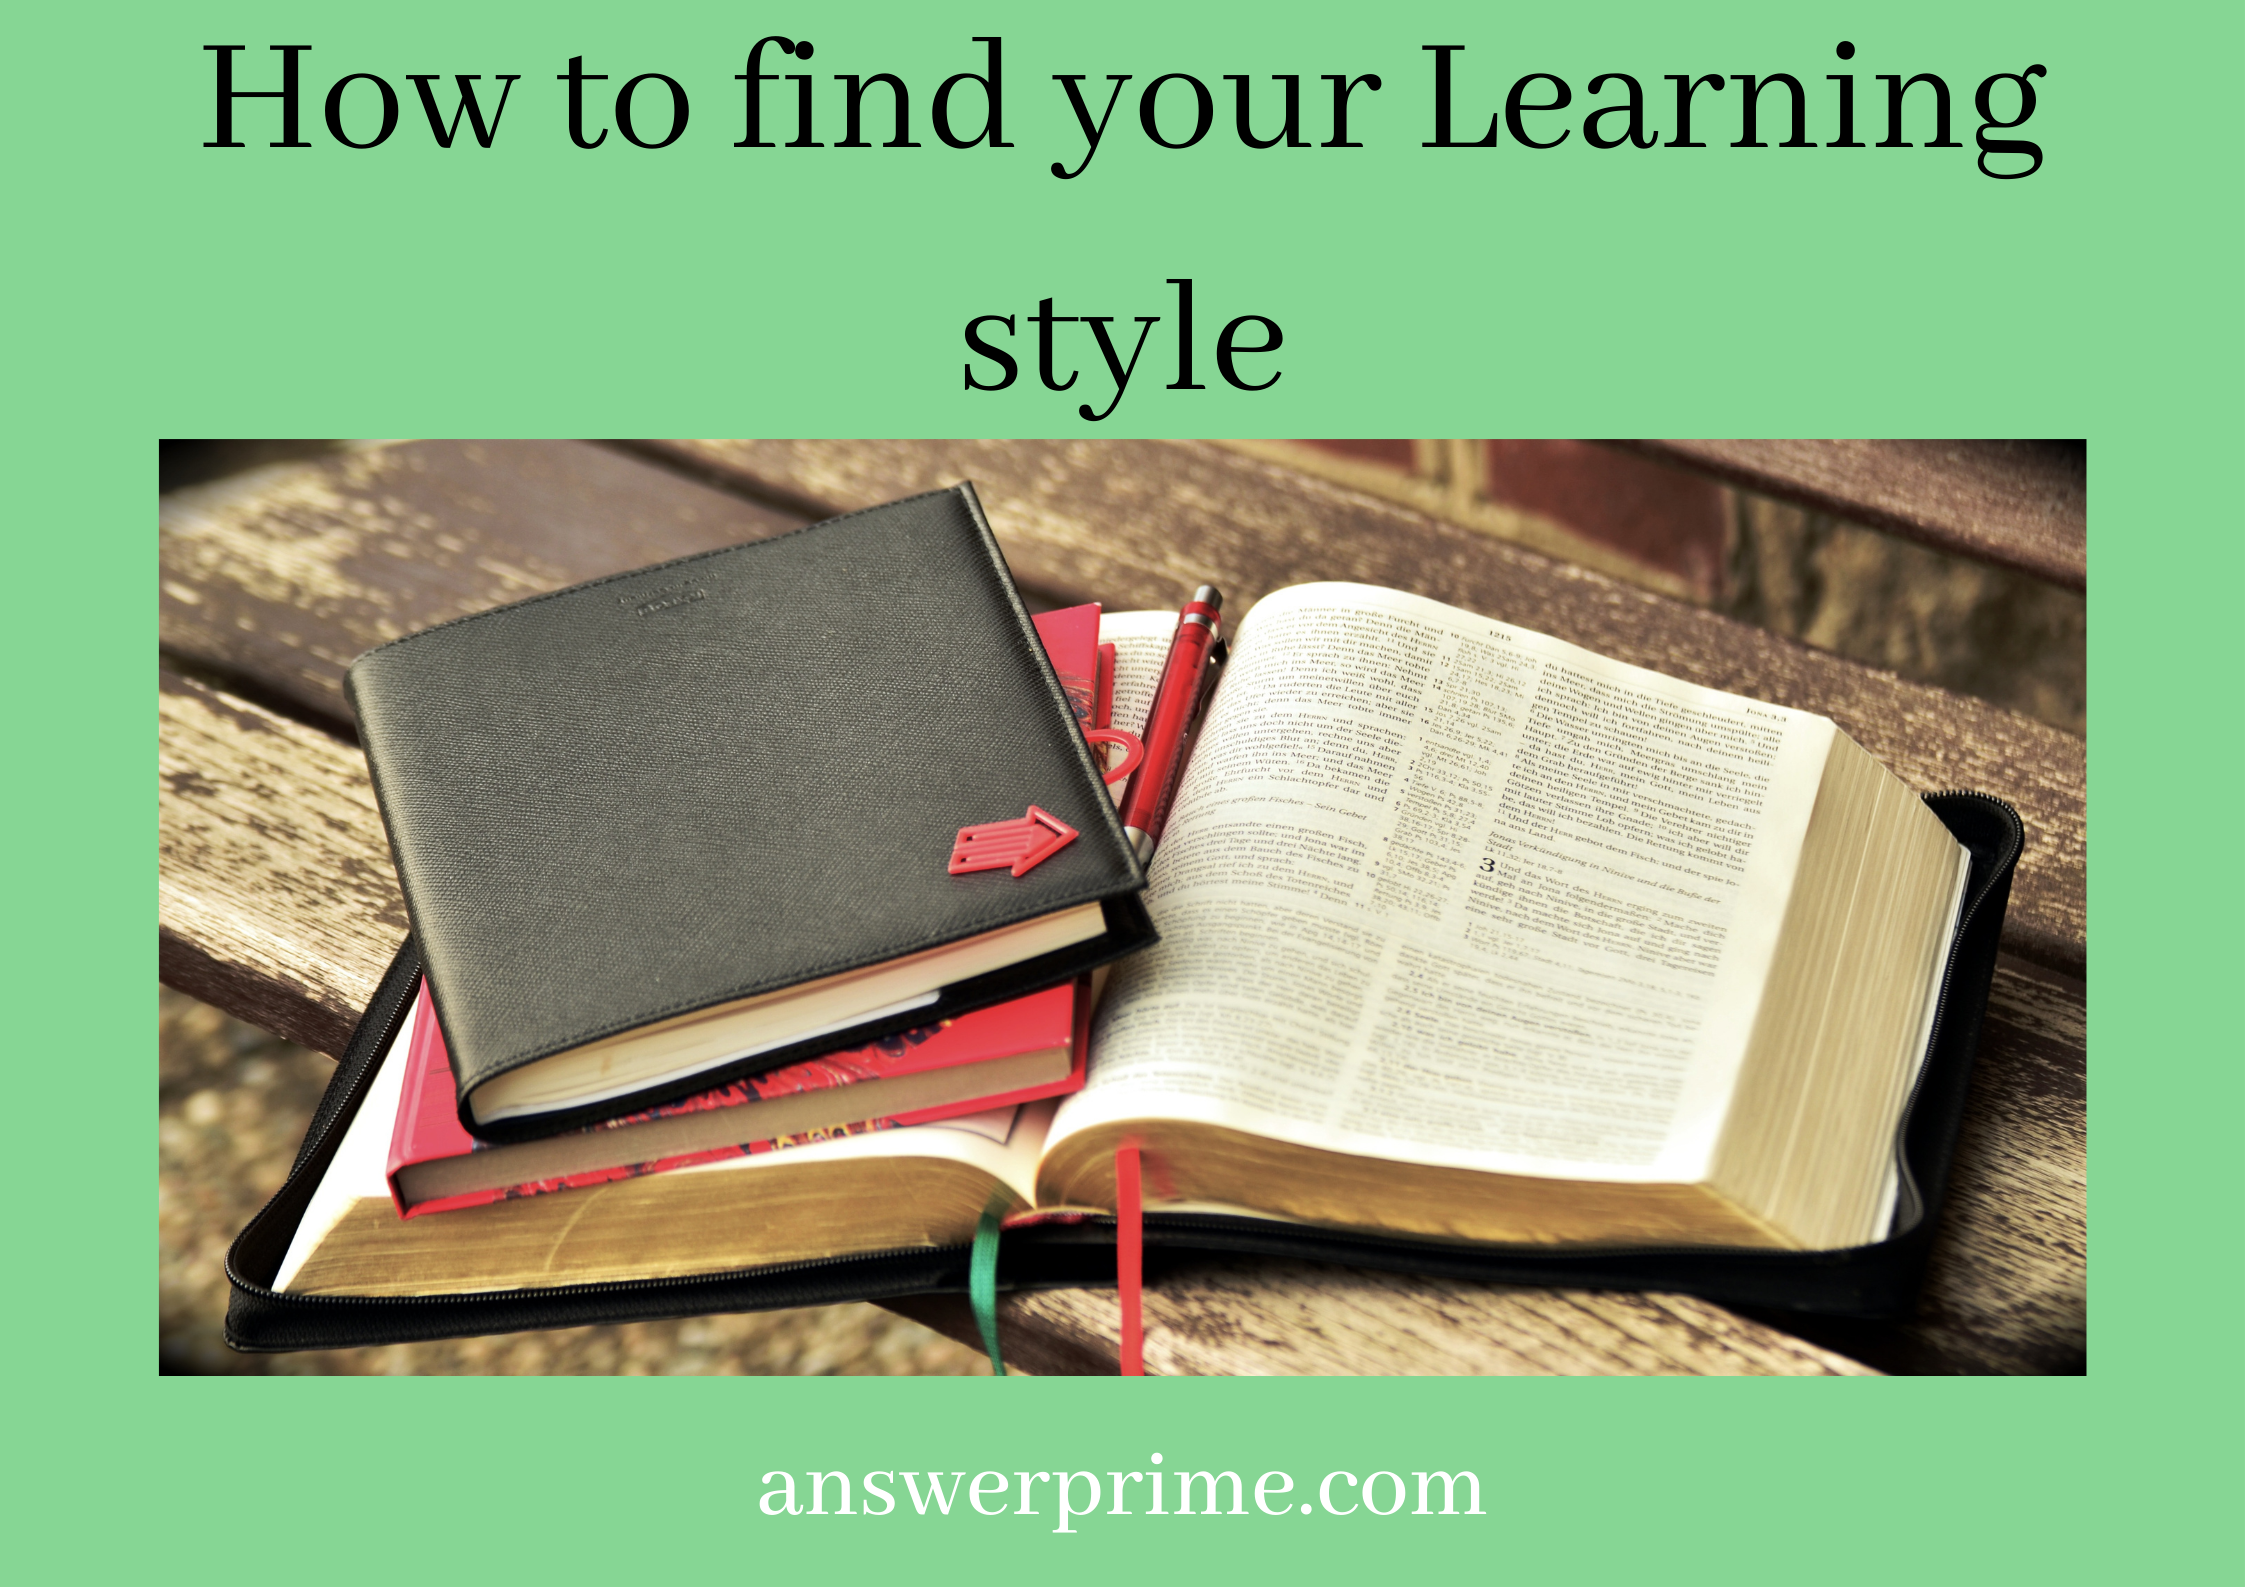 How to find your Learning style